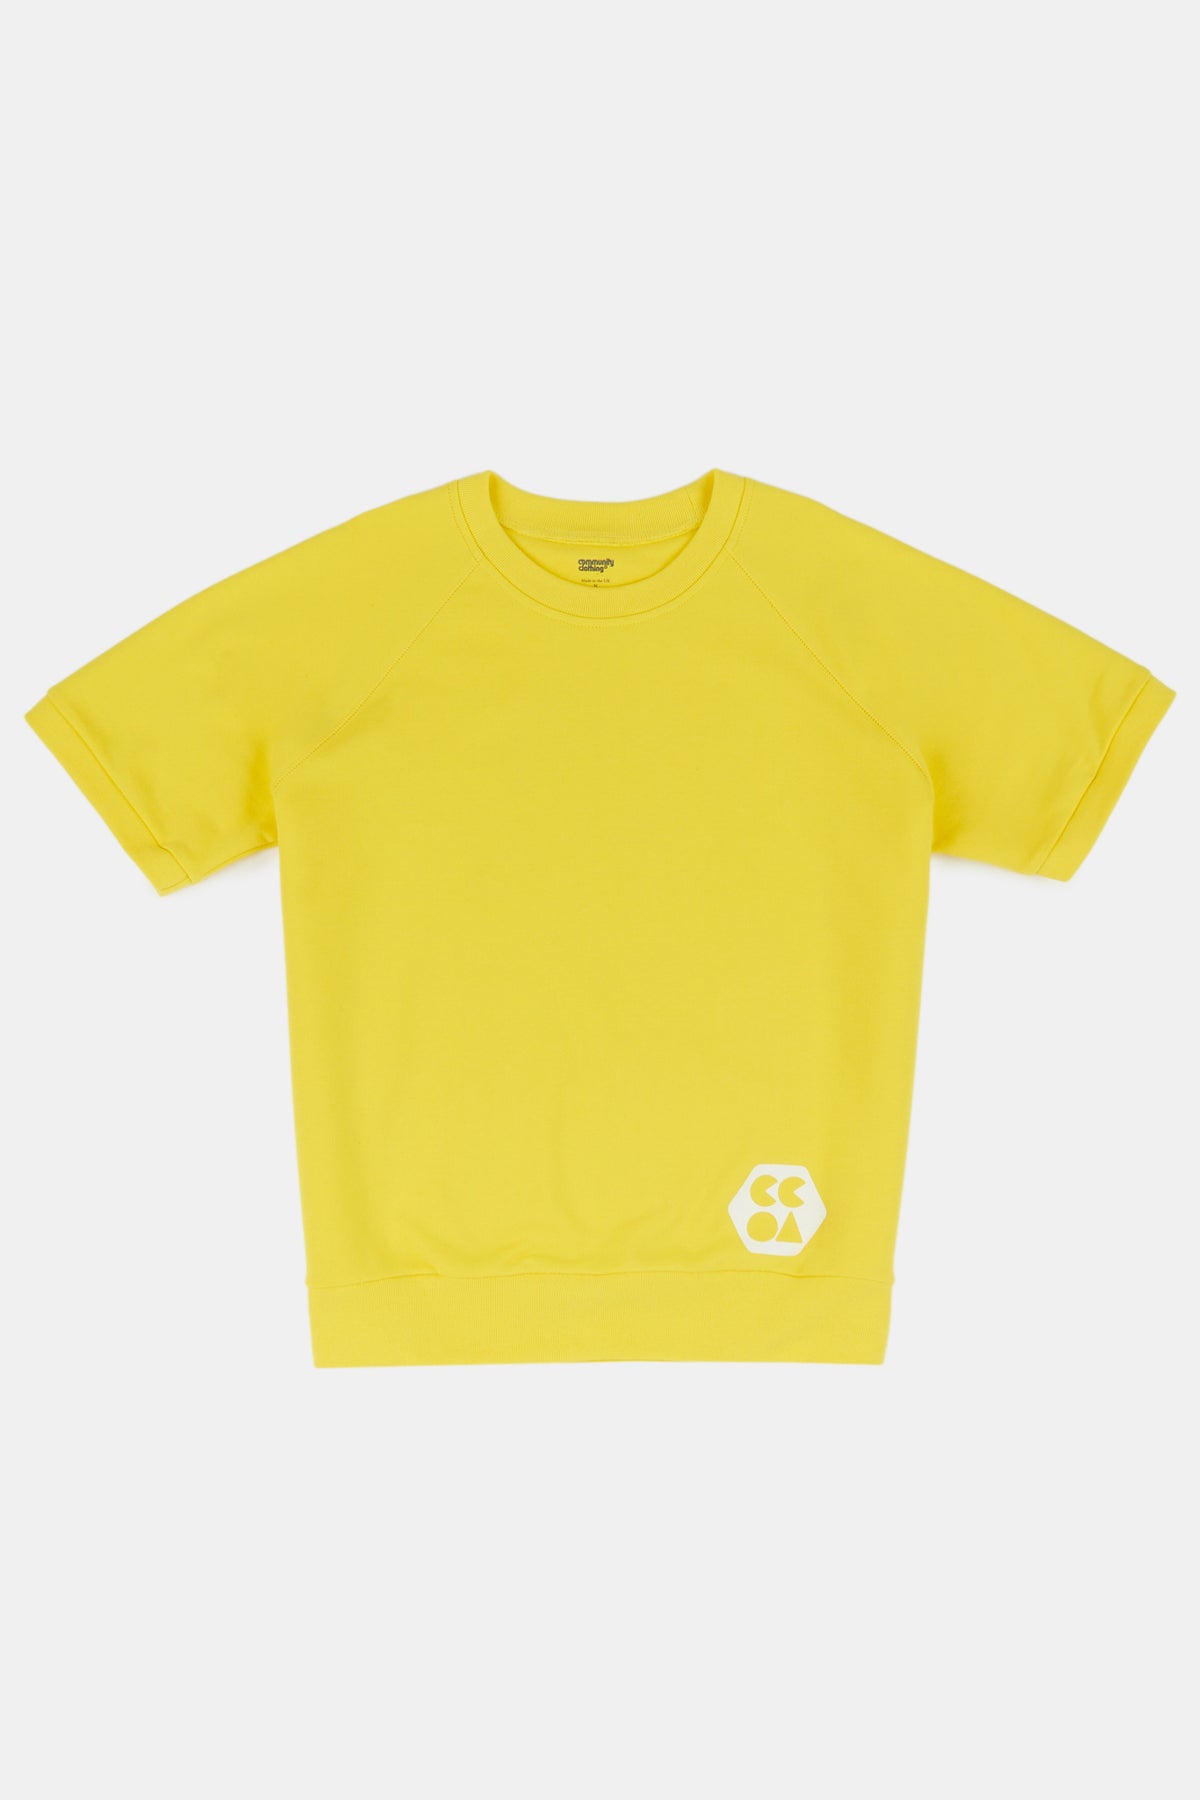 
            Flatlay product shot of short sleeve raglan training top in canary yellow with white CCOA logo